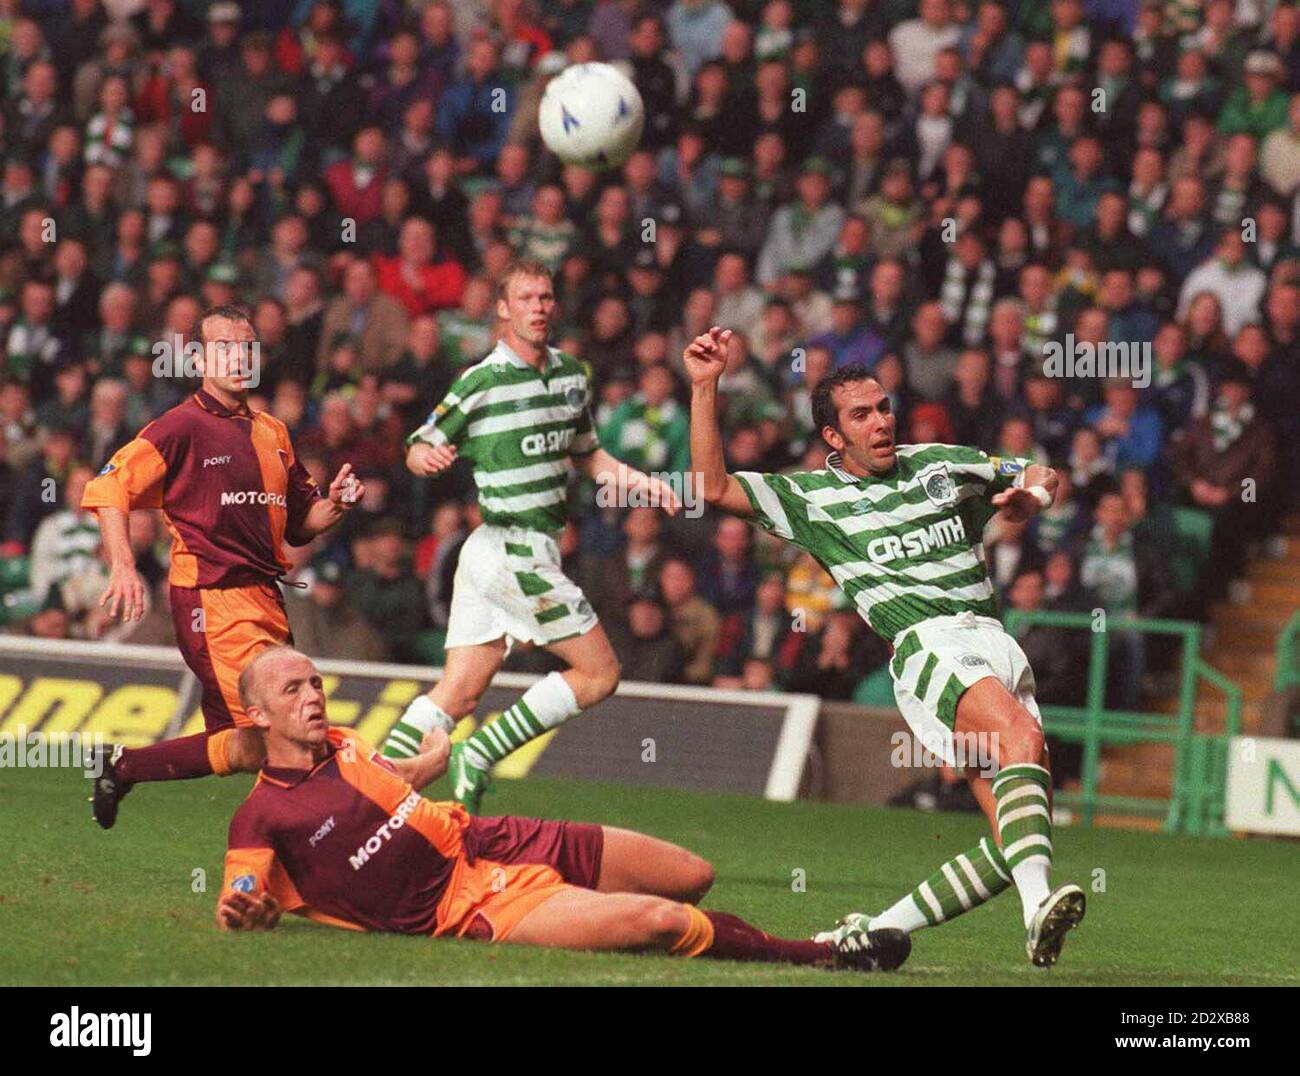 Motherwell's Brian Martin slides in to tackle Celtic's Paolo Di Canio, during their Scottish Premiership match today (Saturday). PA Photos. Stock Photo